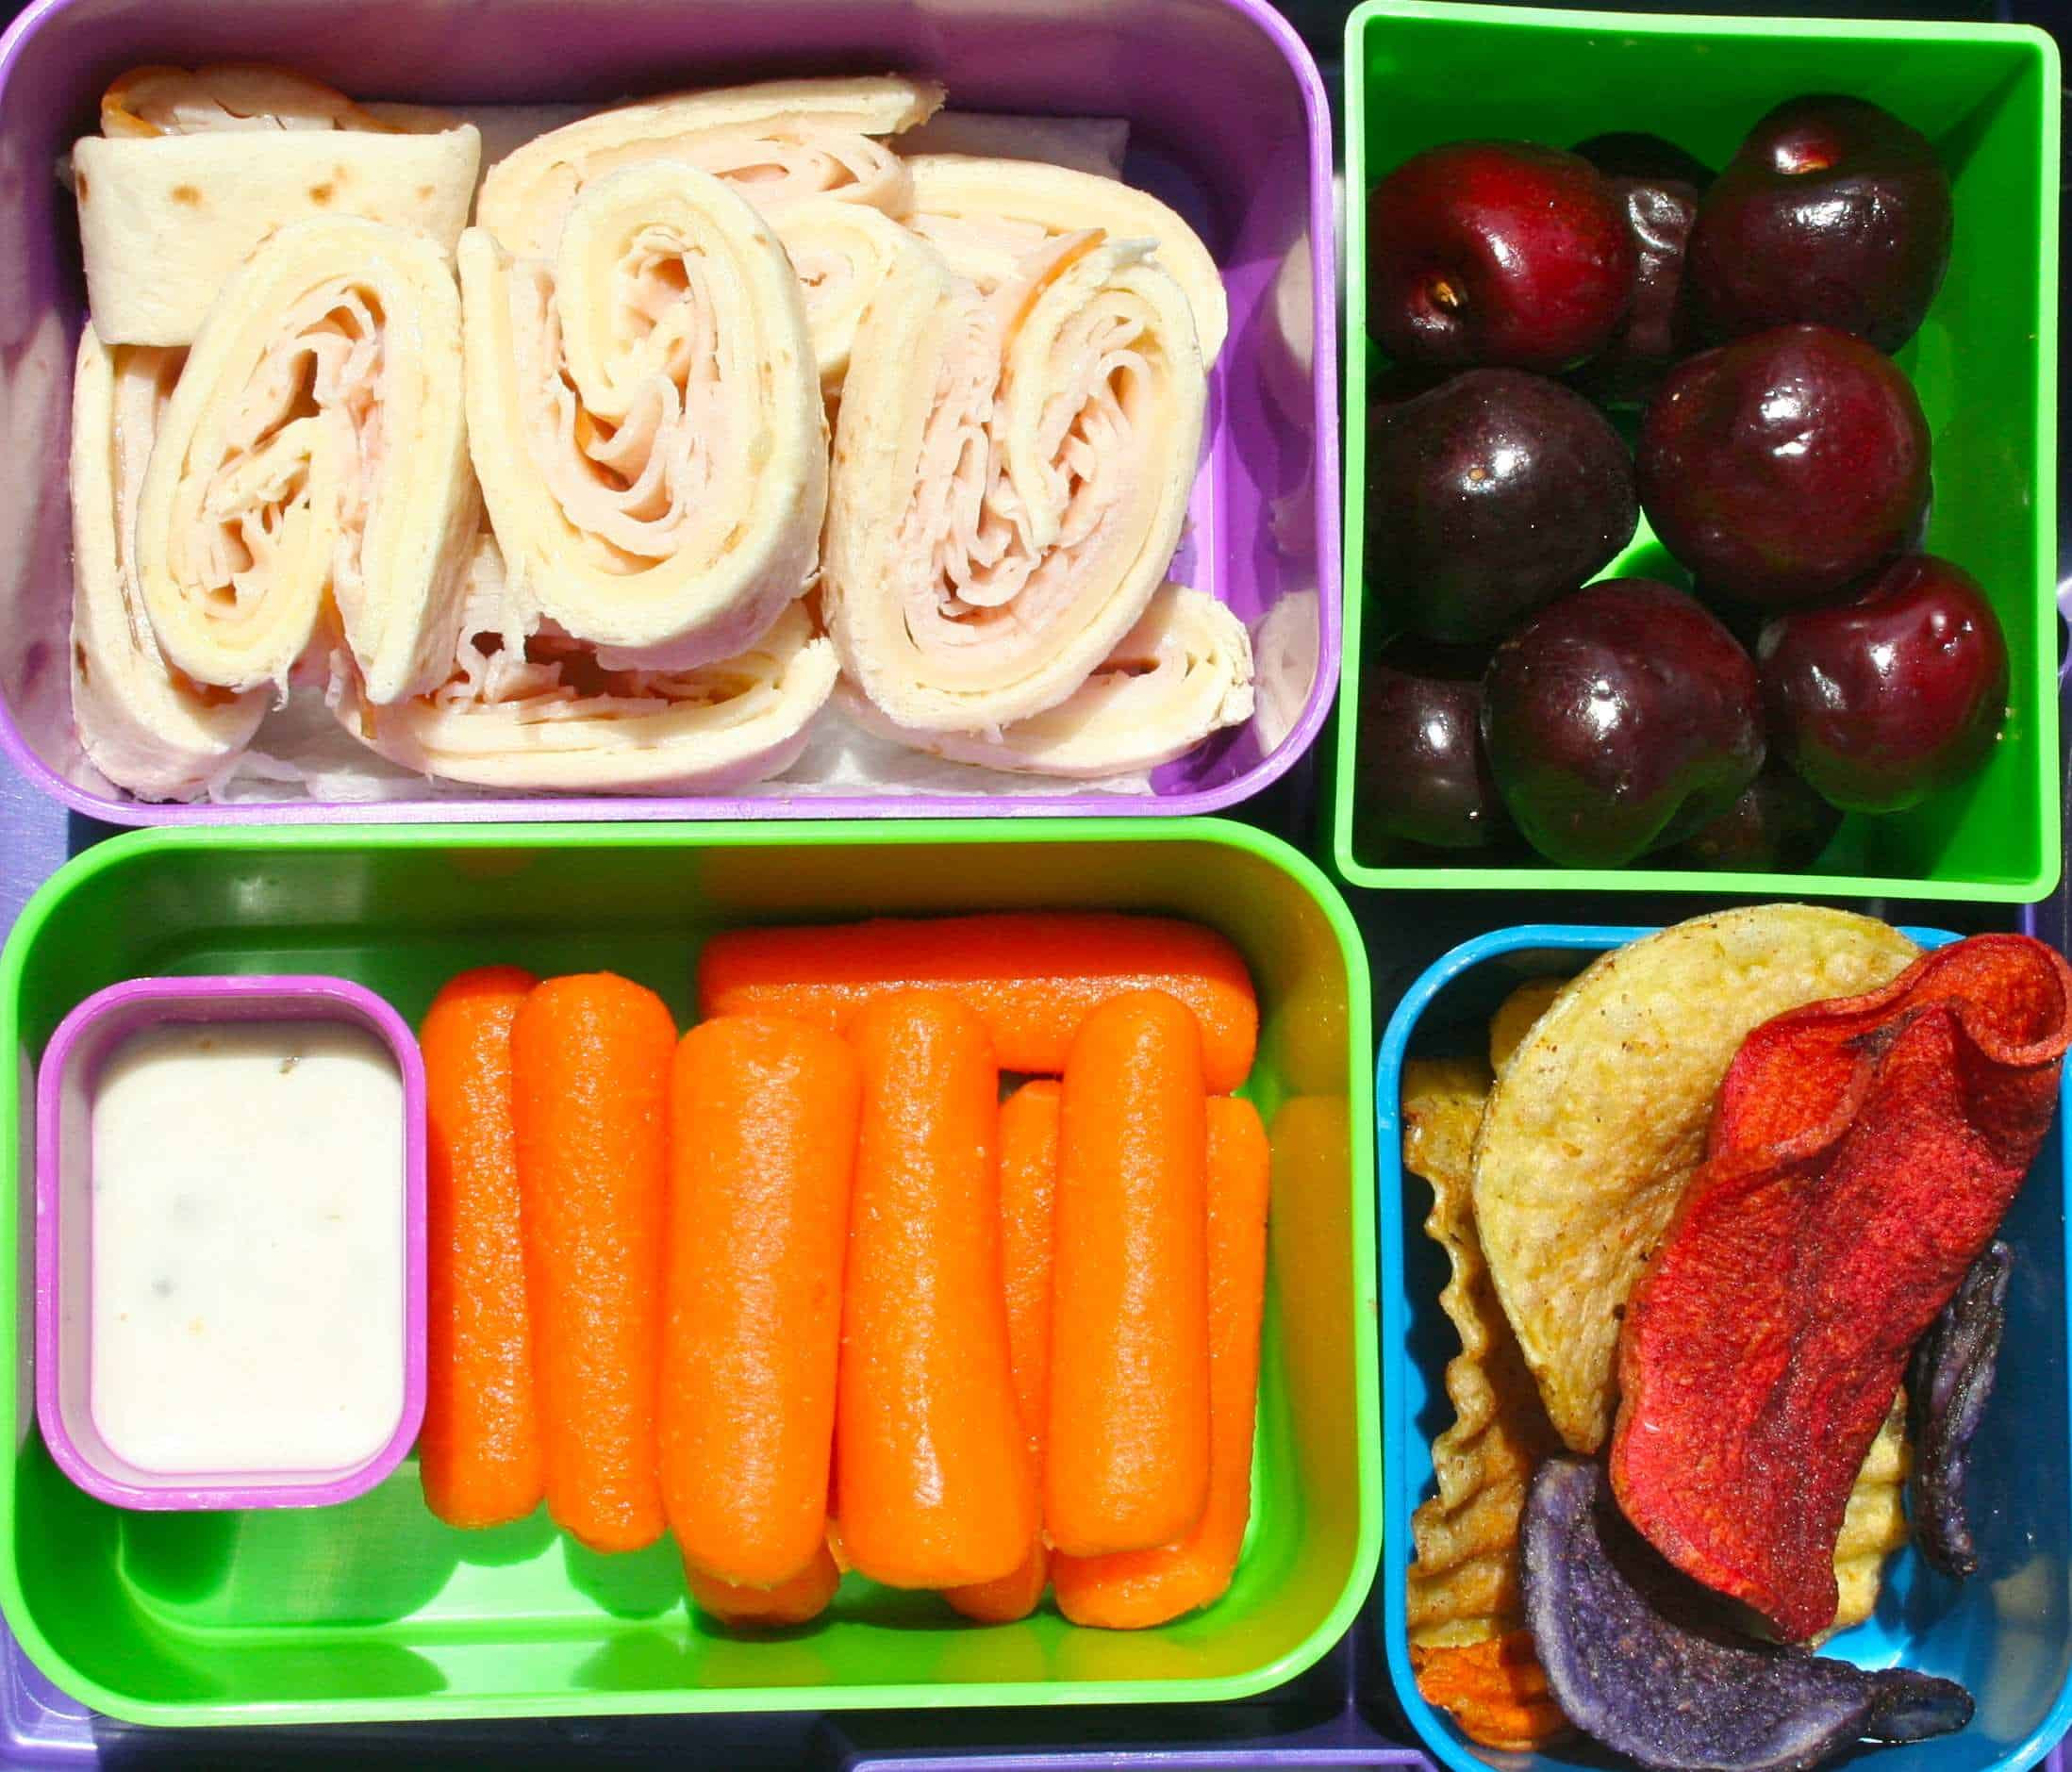 Healthy Lunches To Pack
 Getting Back to School How to Pack Fresh Lunches